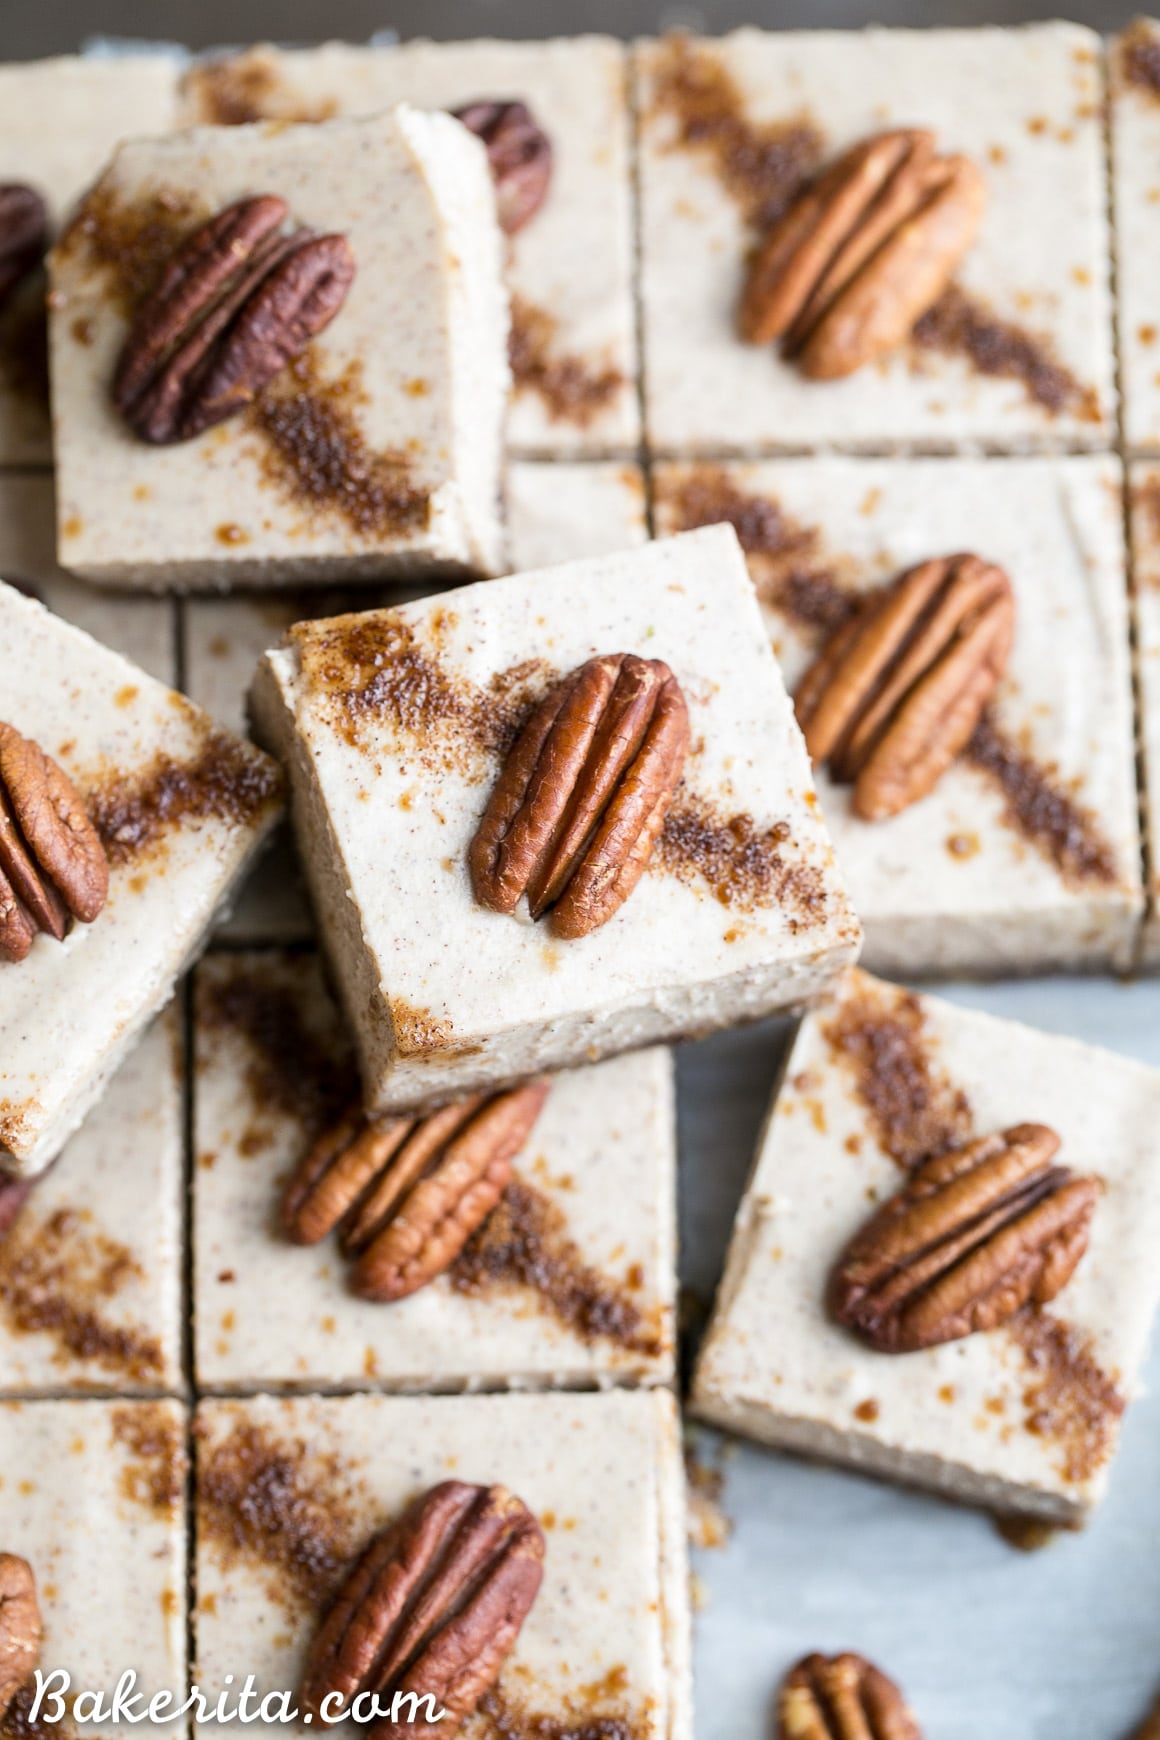 These Chai Cheesecake Bars are tangy and full of spicy chai flavor - they have a vegan cashew cheesecake filling and a pecan date crust. These creamy cheesecake bars are gluten-free, paleo, vegan, and there's no baking required!